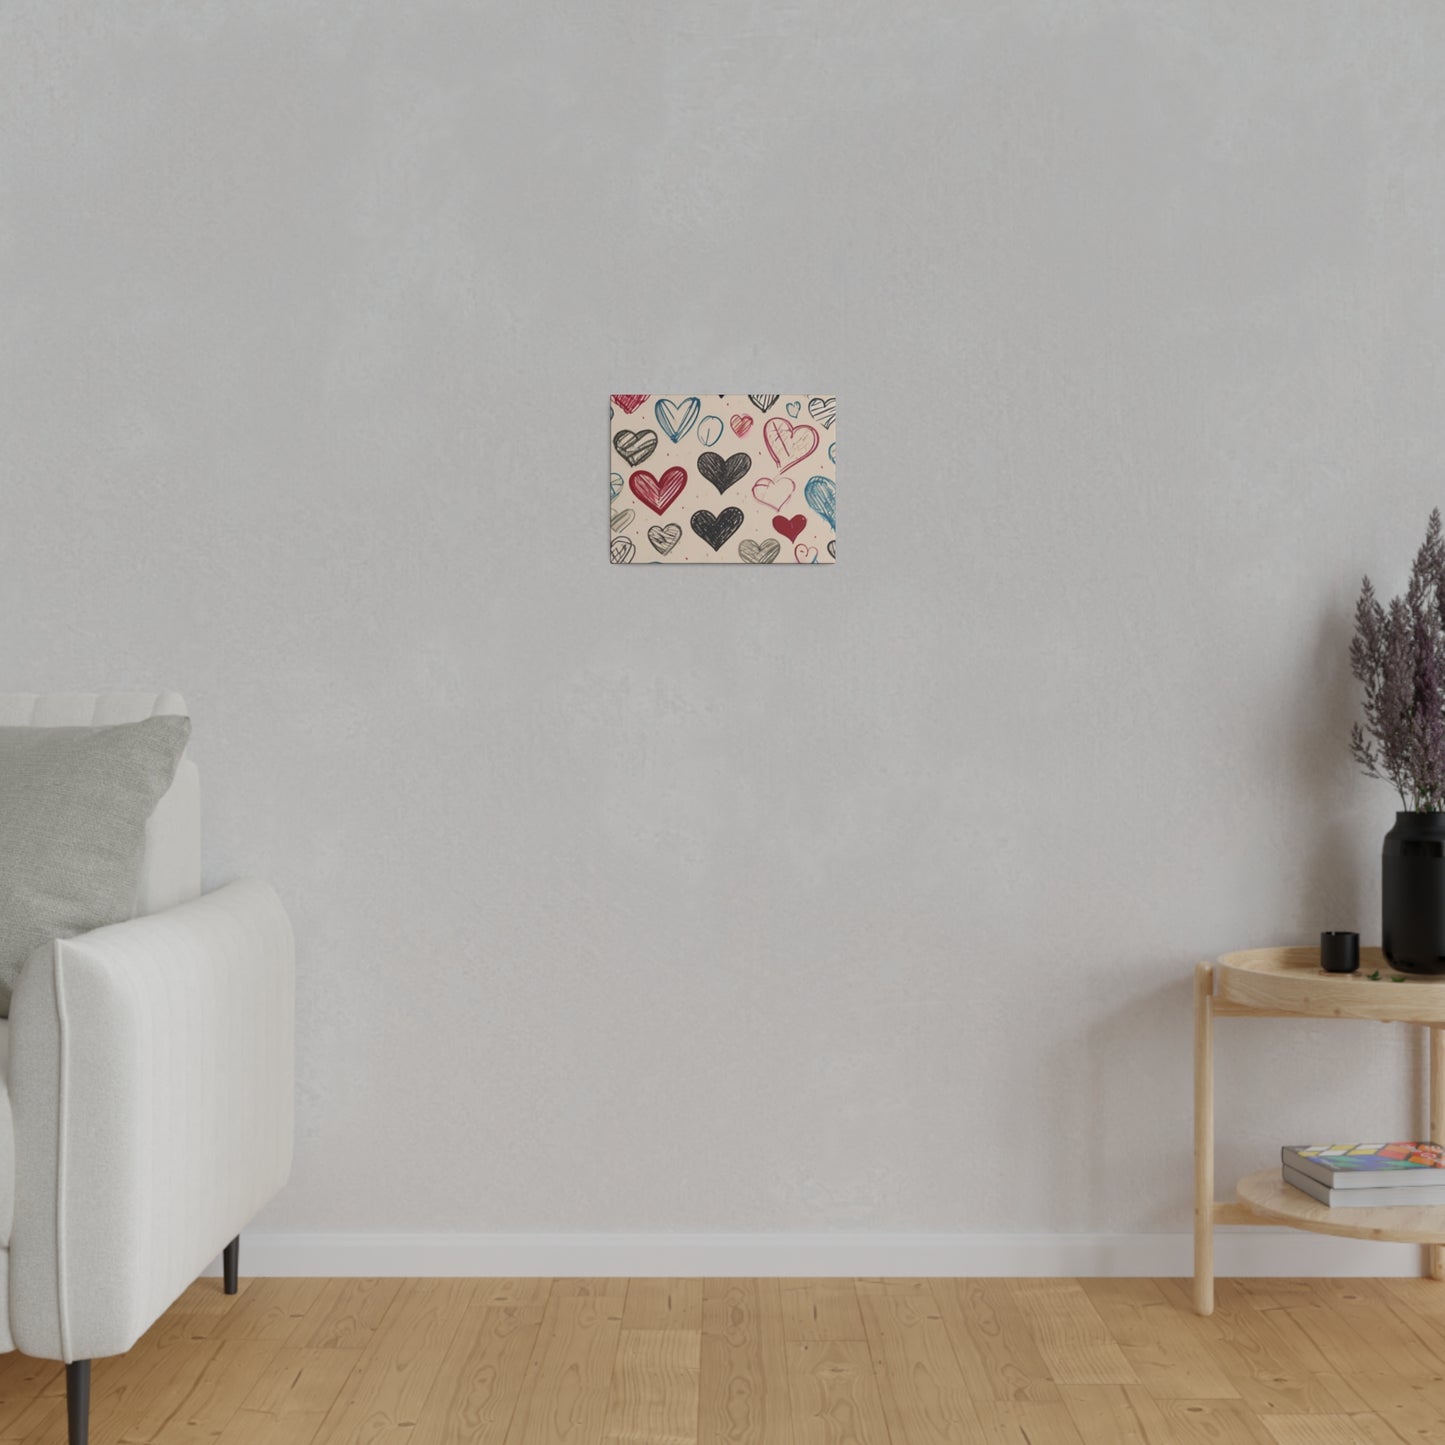 Messy Sketched Love Hearts - Matte Canvas, Stretched, 0.75"